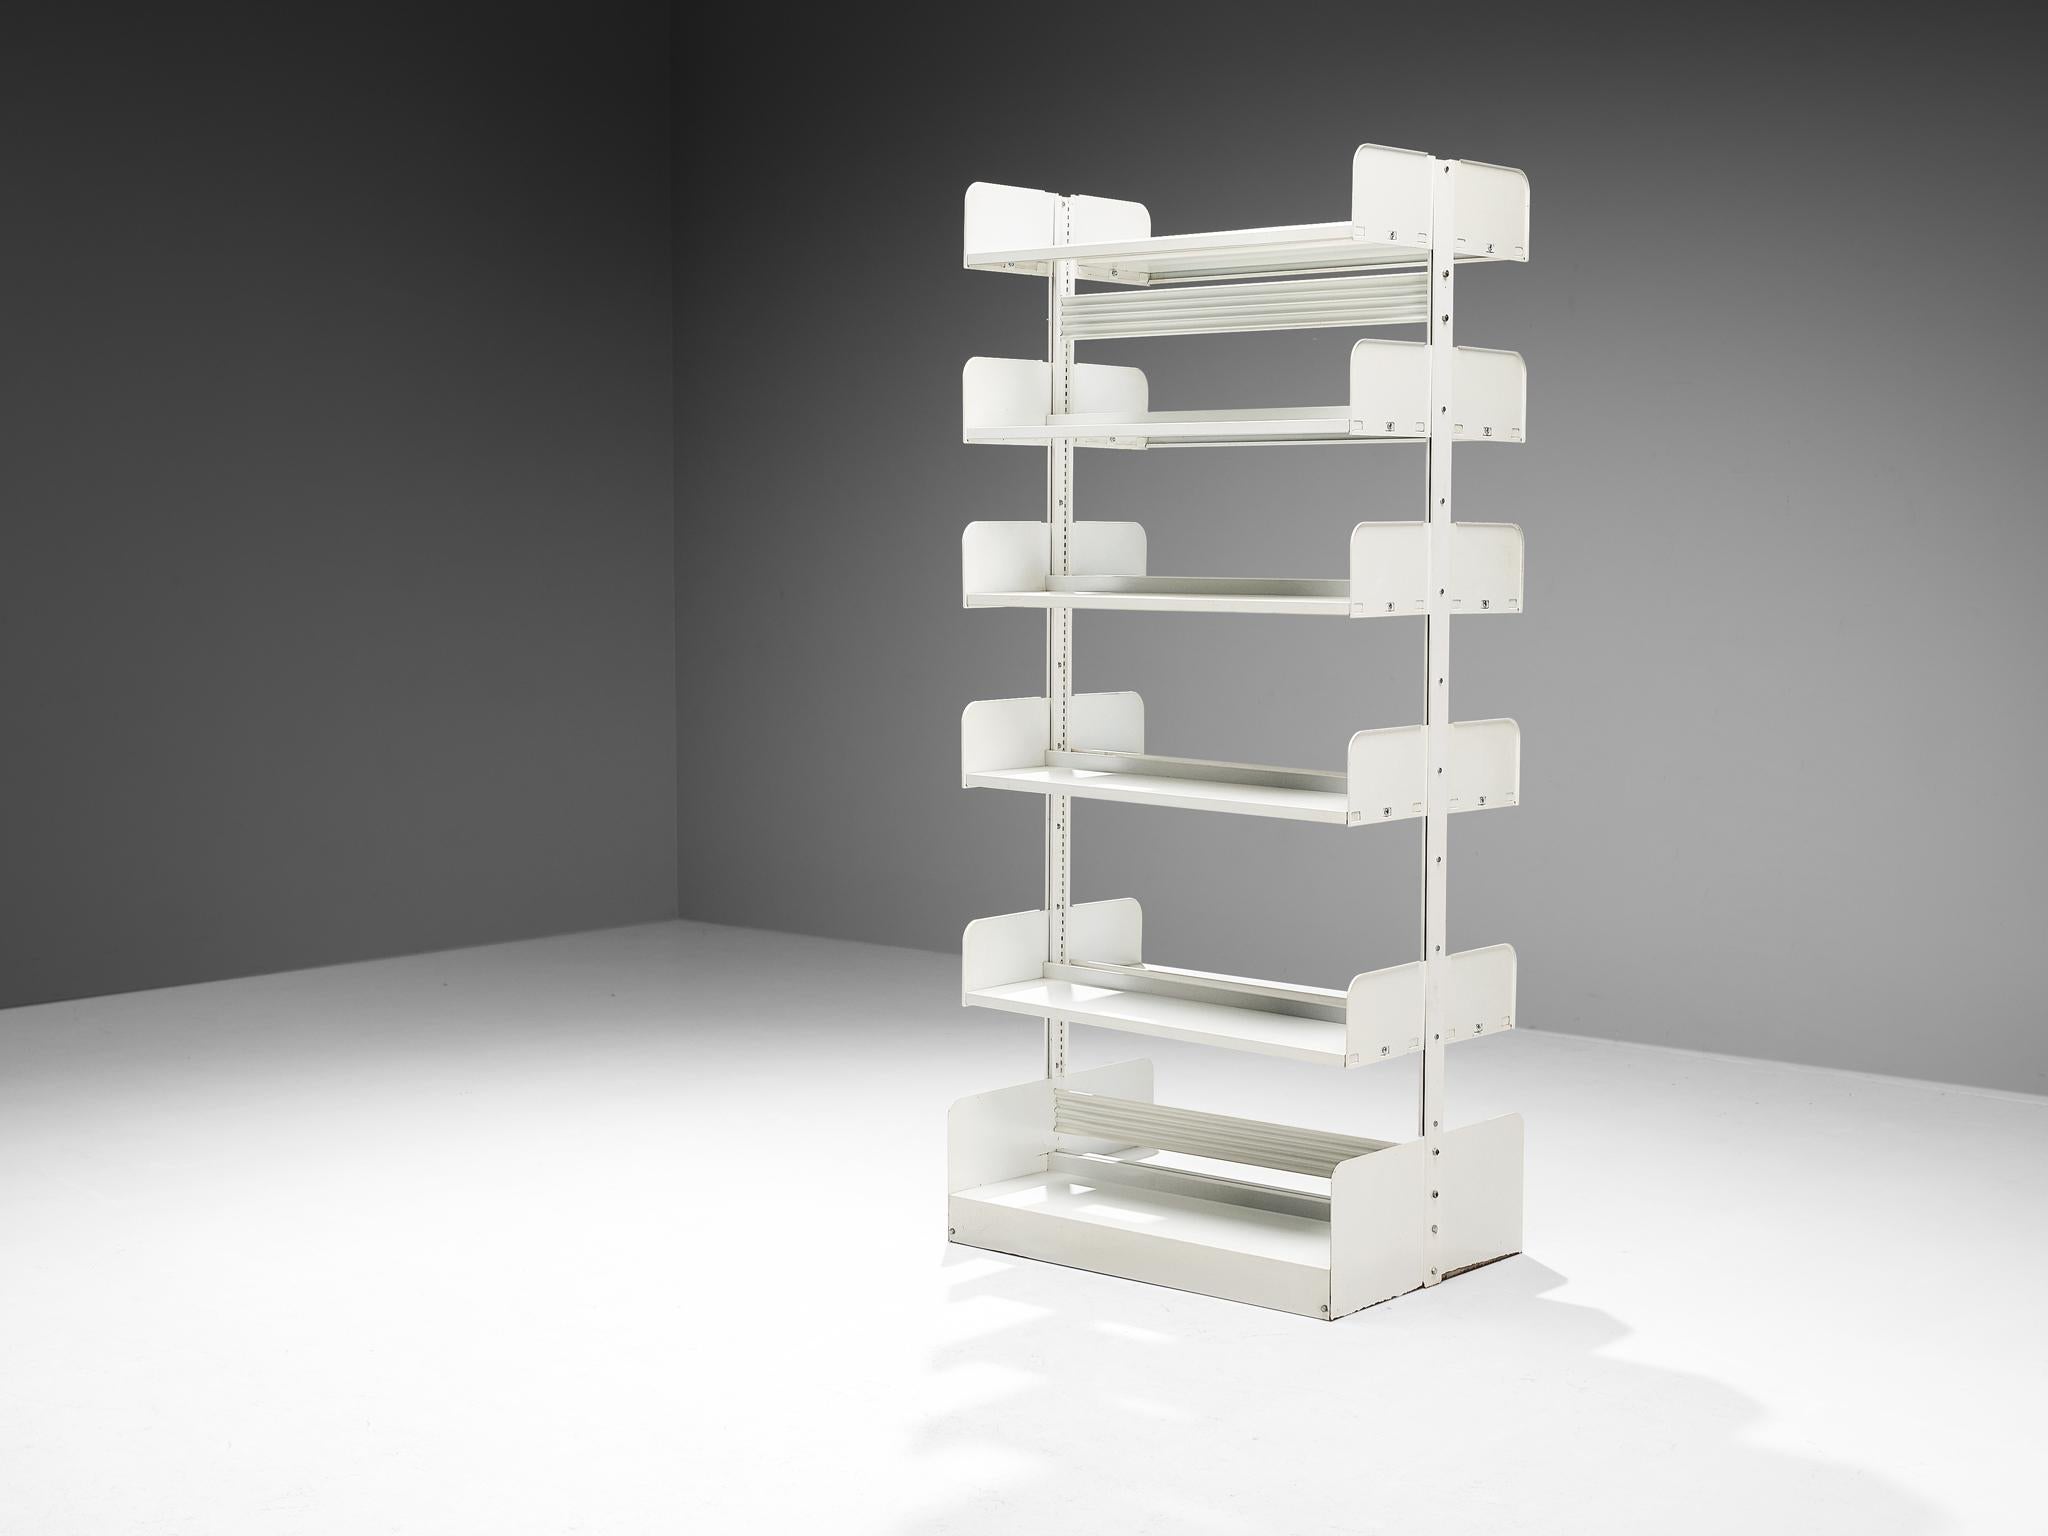 Lips Vago, 'Congresso' shelving unit, white lacquered steel, Italy, 1960s.

Constructed from steel sheets, the double 'Congresso' shelf is a sturdy yet unassuming bookcase that can be used on either side, making it a versatile addition to any space.